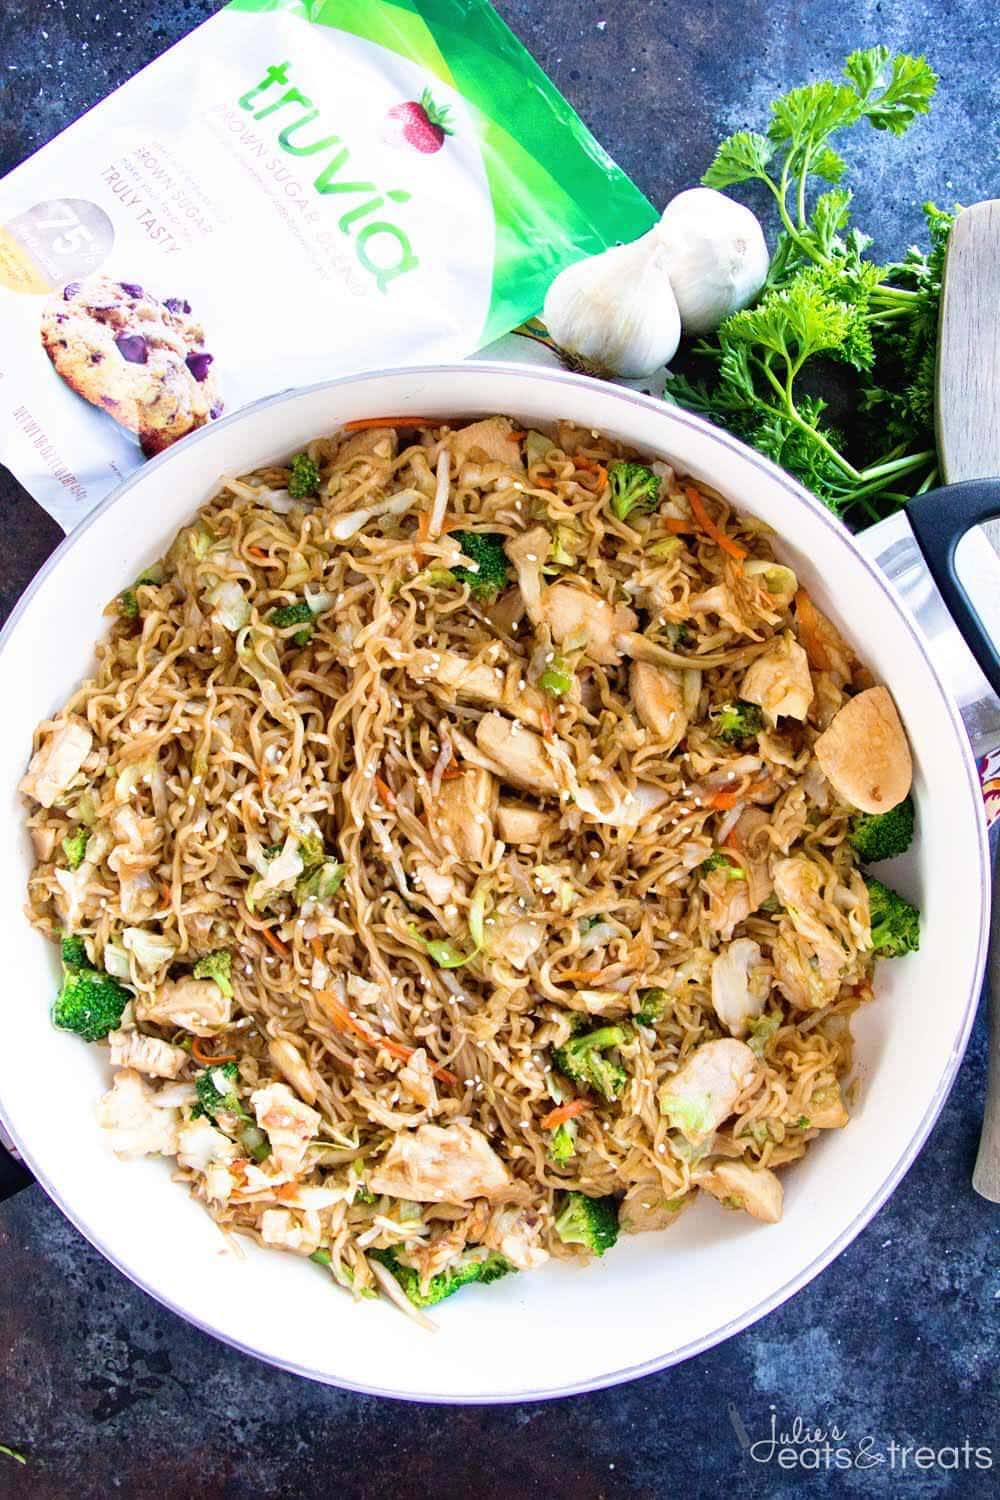 Chicken Ramen Stir-Fry ~ Easy, Delicious Weeknight Meal Loaded with Healthy Ingredients with the Addition of Ramen for a Fun Twist! On the Table in 30 Minutes!